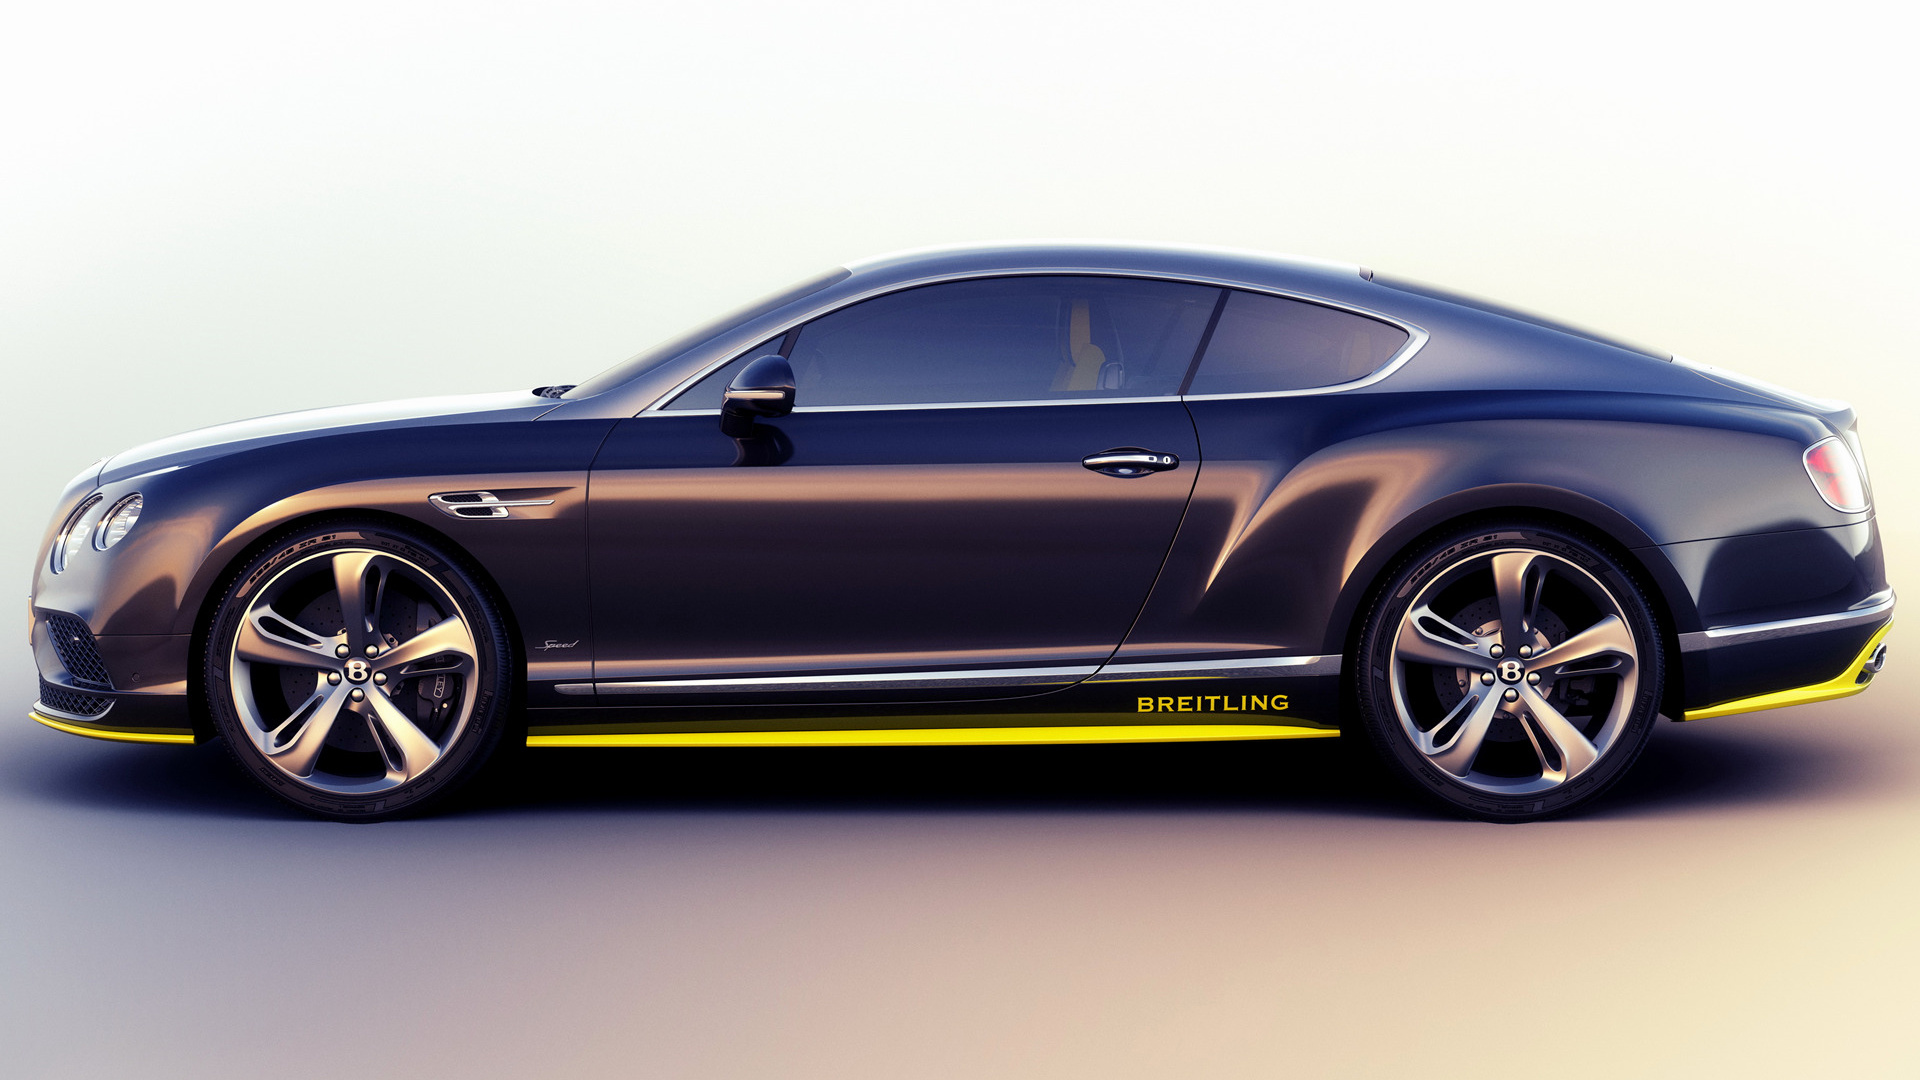 Bentley Continental Gt Speed Breitling Jet Team Series By Mulliner Car Coupe Fastback Grand Tourer L 1920x1080